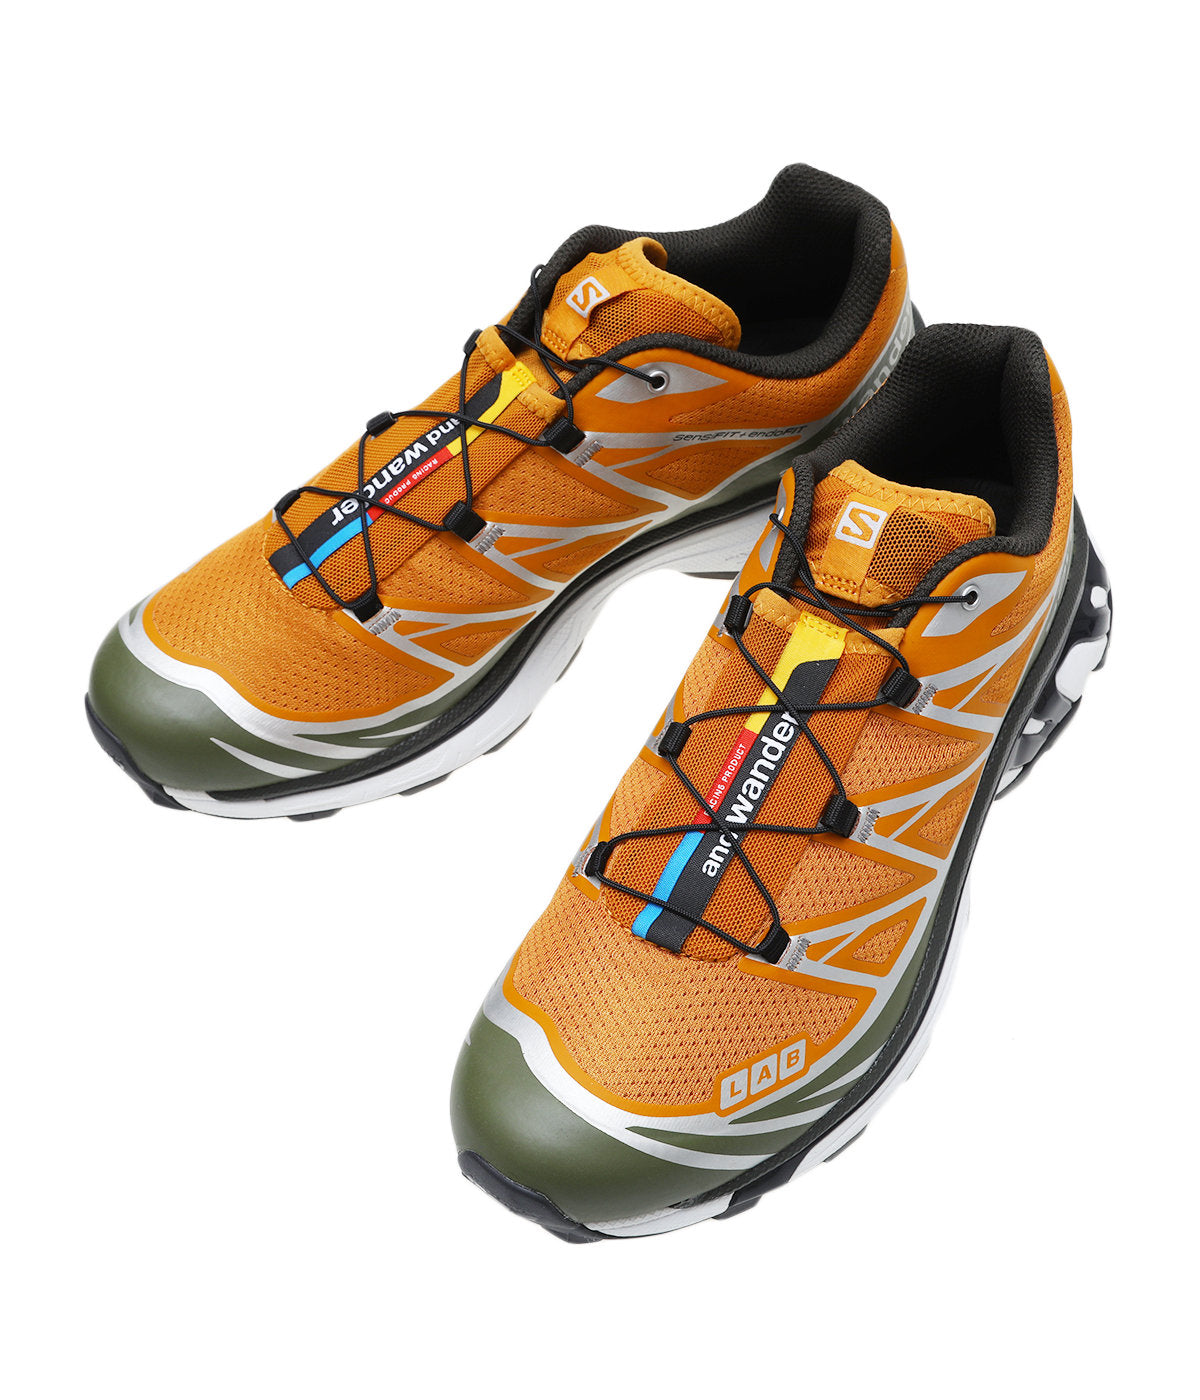 SALOMON XT-6 for and wander – unexpected store